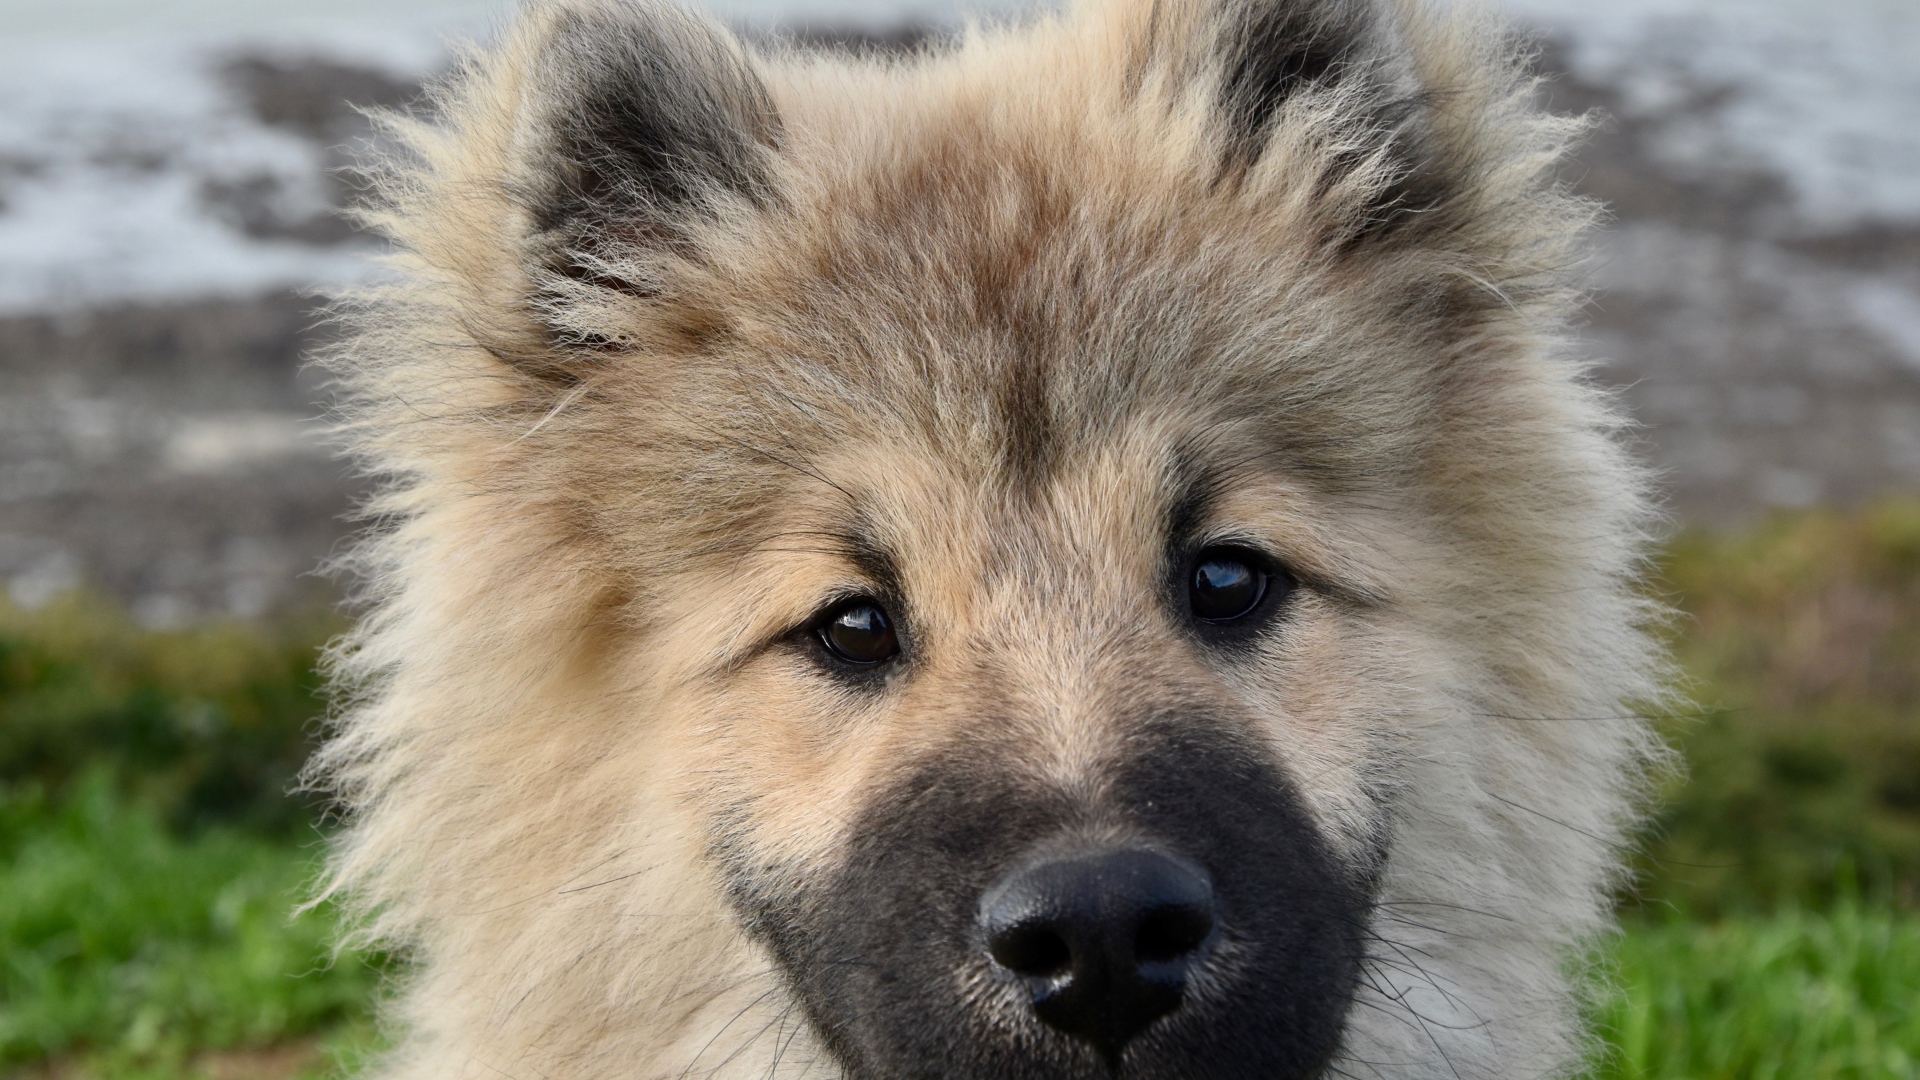 Funny fluffy puppy Eurasier breed close-up